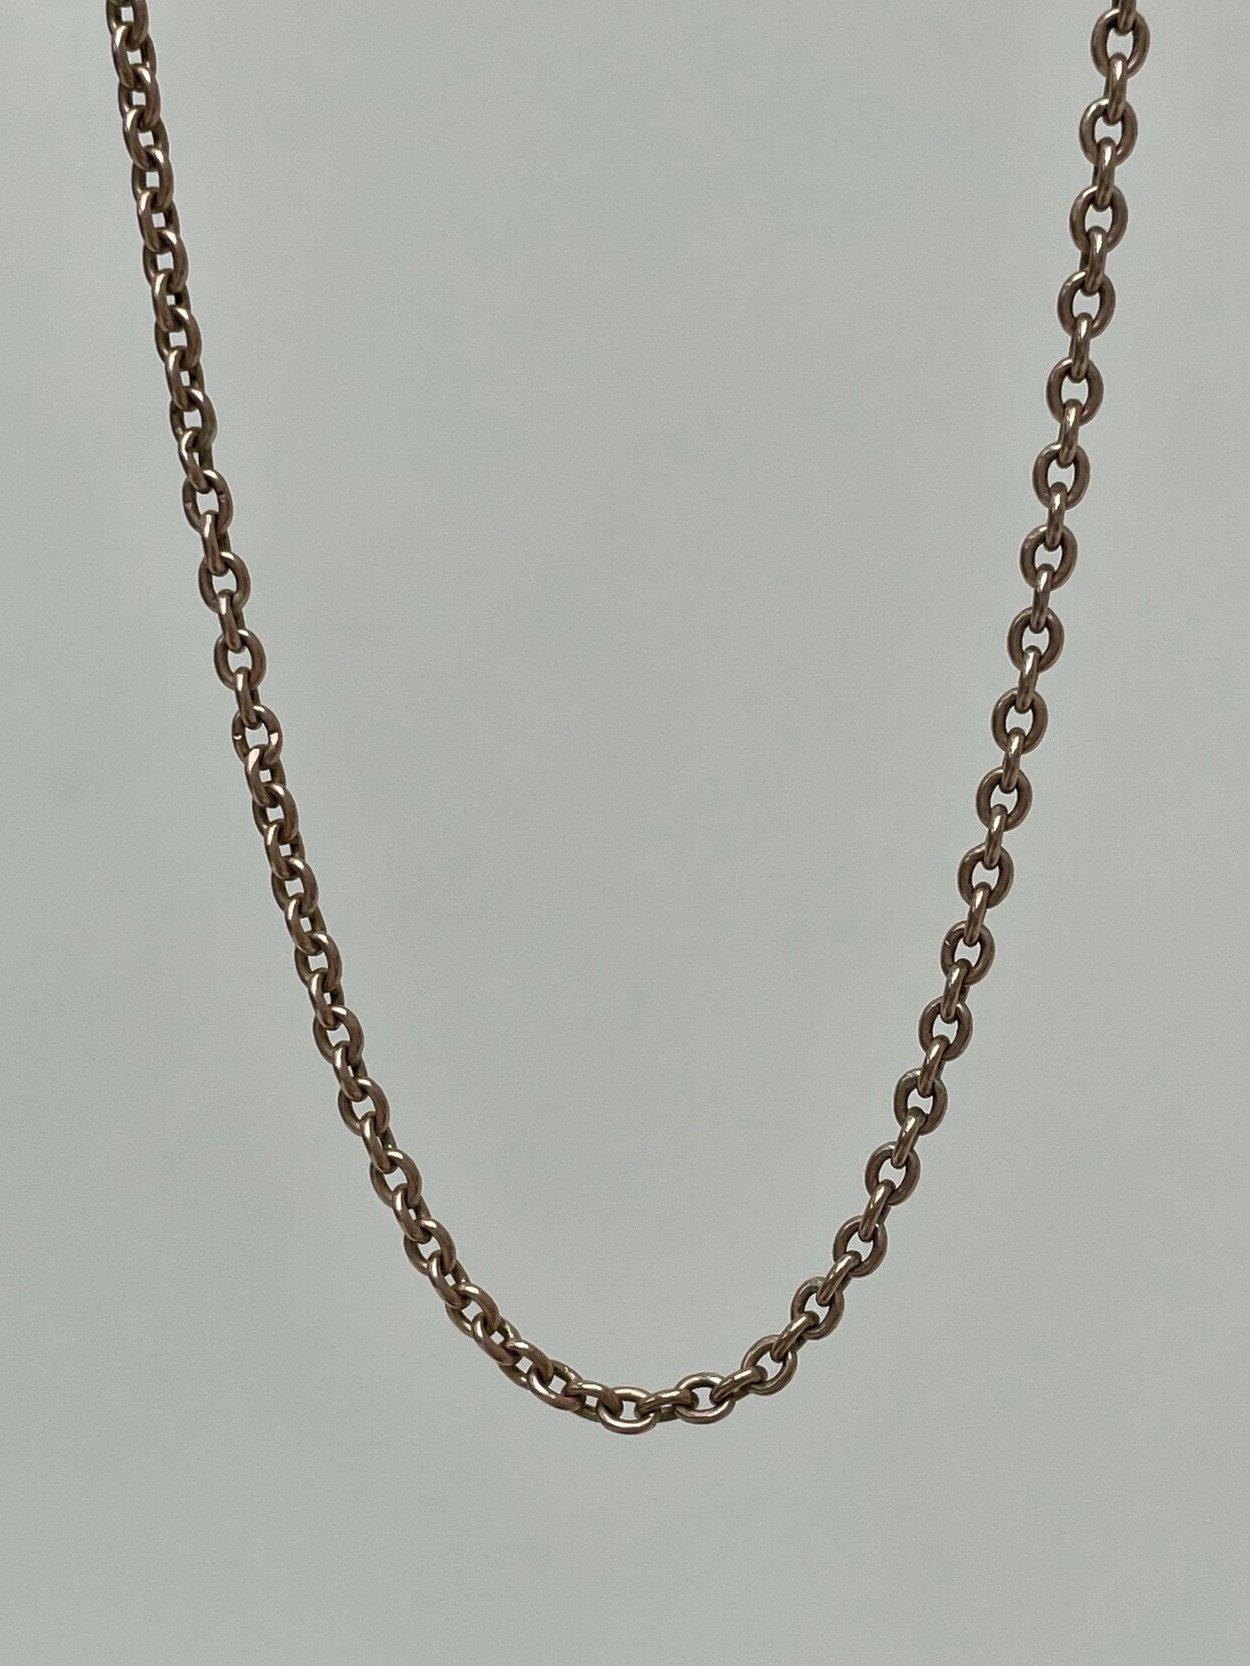 15CT GOLD LONG CHAIN - £750